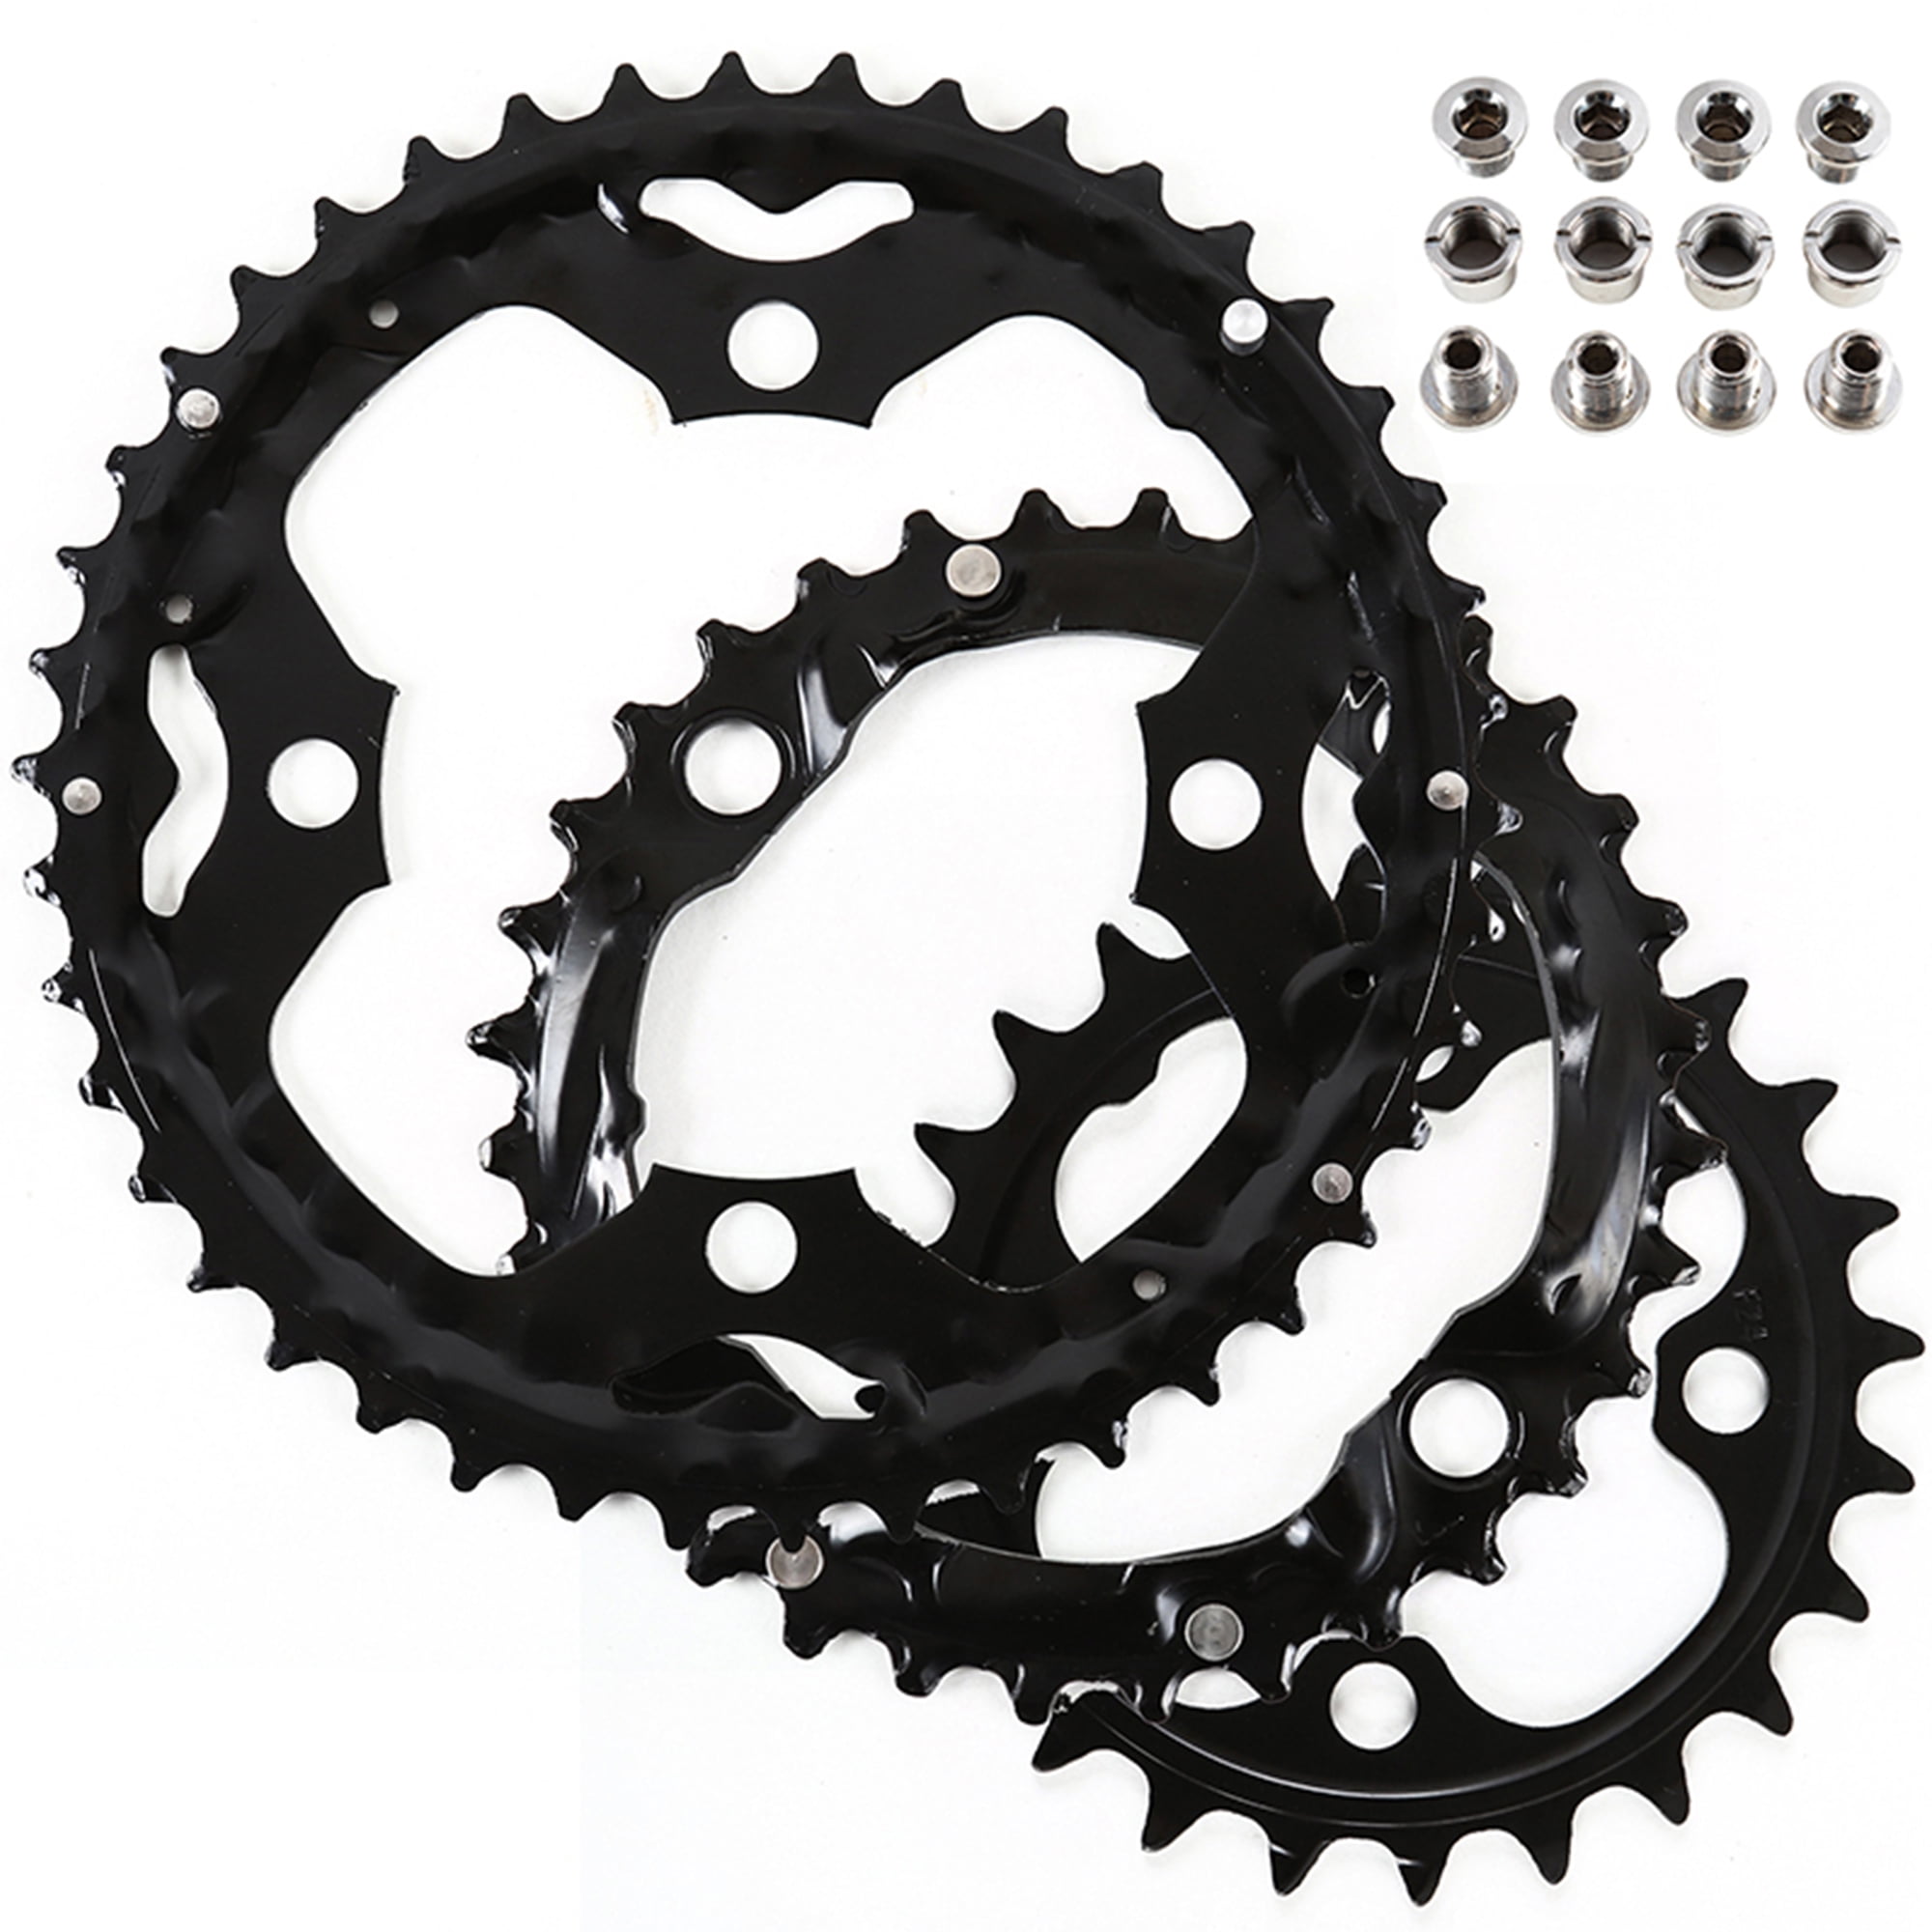 Durable Aluminium Alloy Cycling Chainring for BCD 104 mm 9 rate Bike 44T Bicycle Chainring 